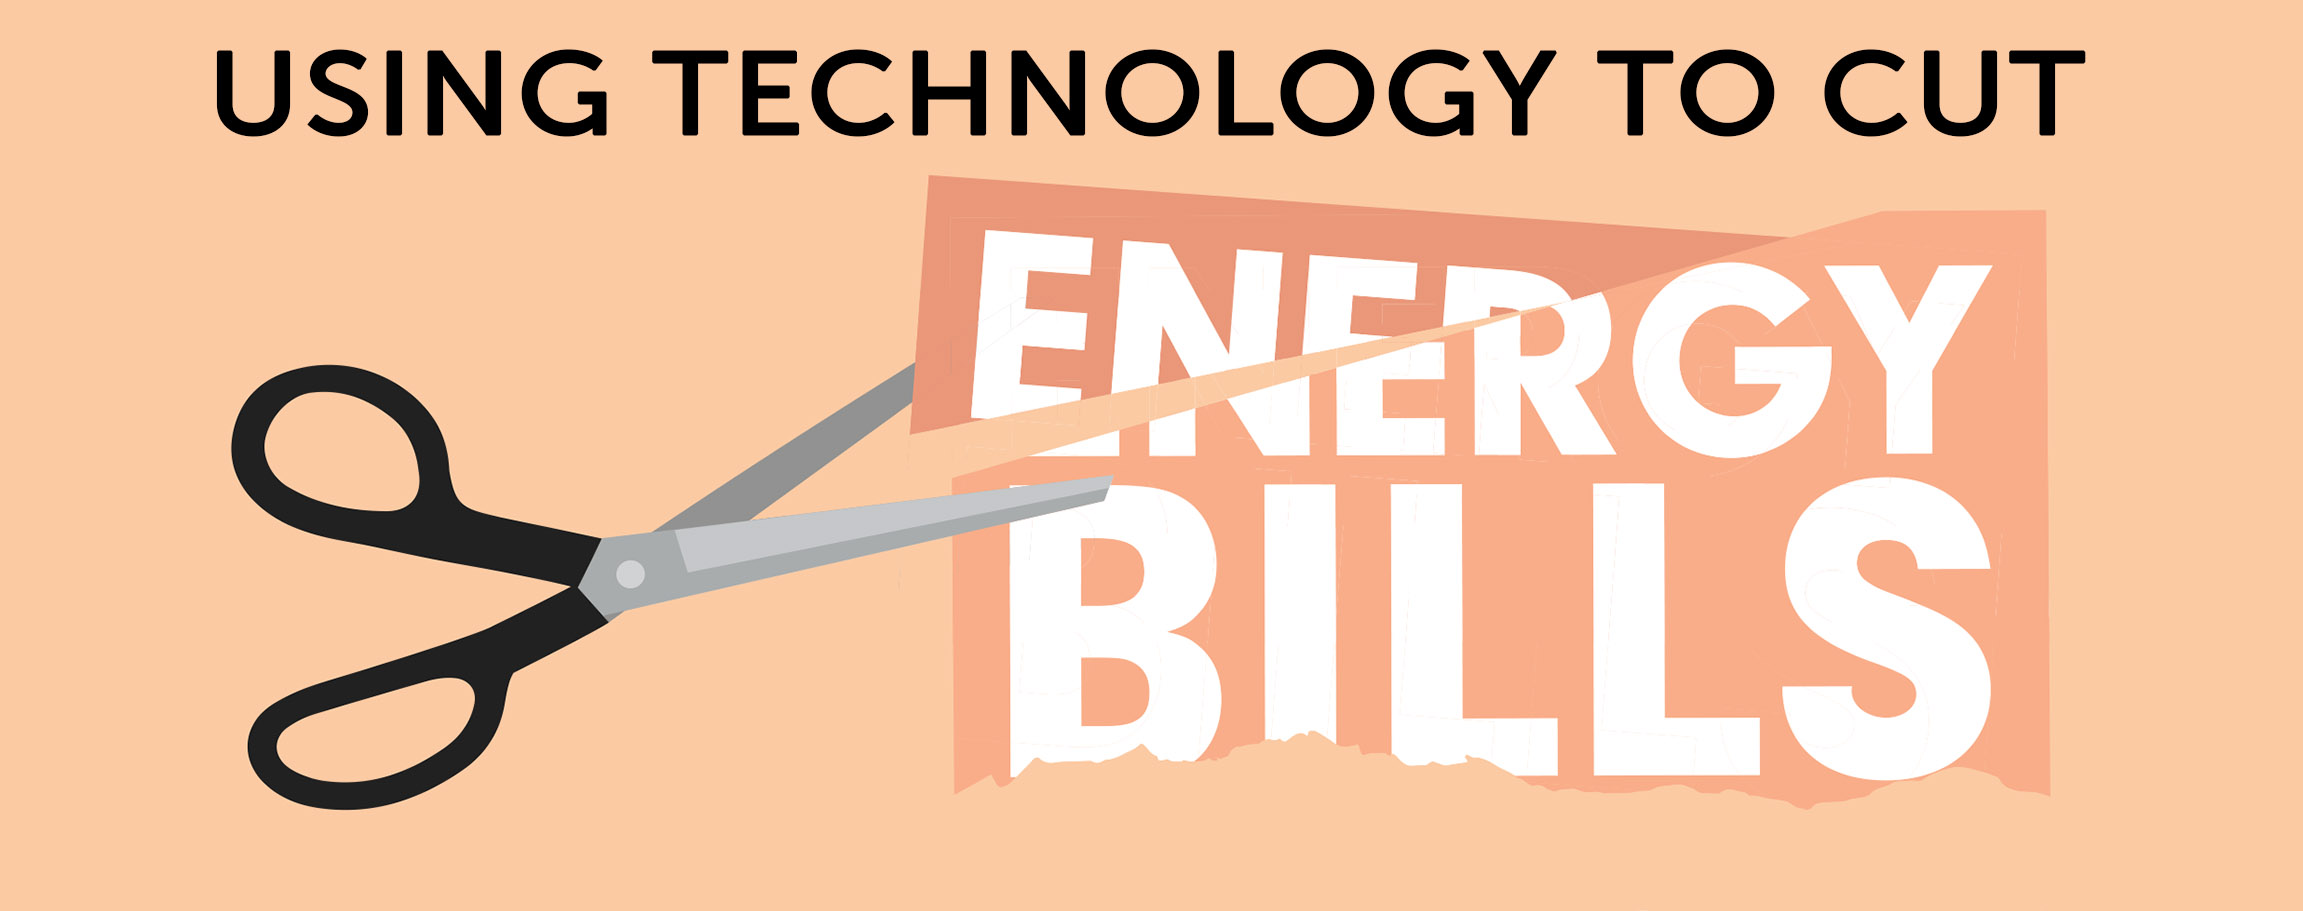 Image: a pair of scissors is cutting up the words "energy bills". Additional Text: Using technology to cut energy bills.